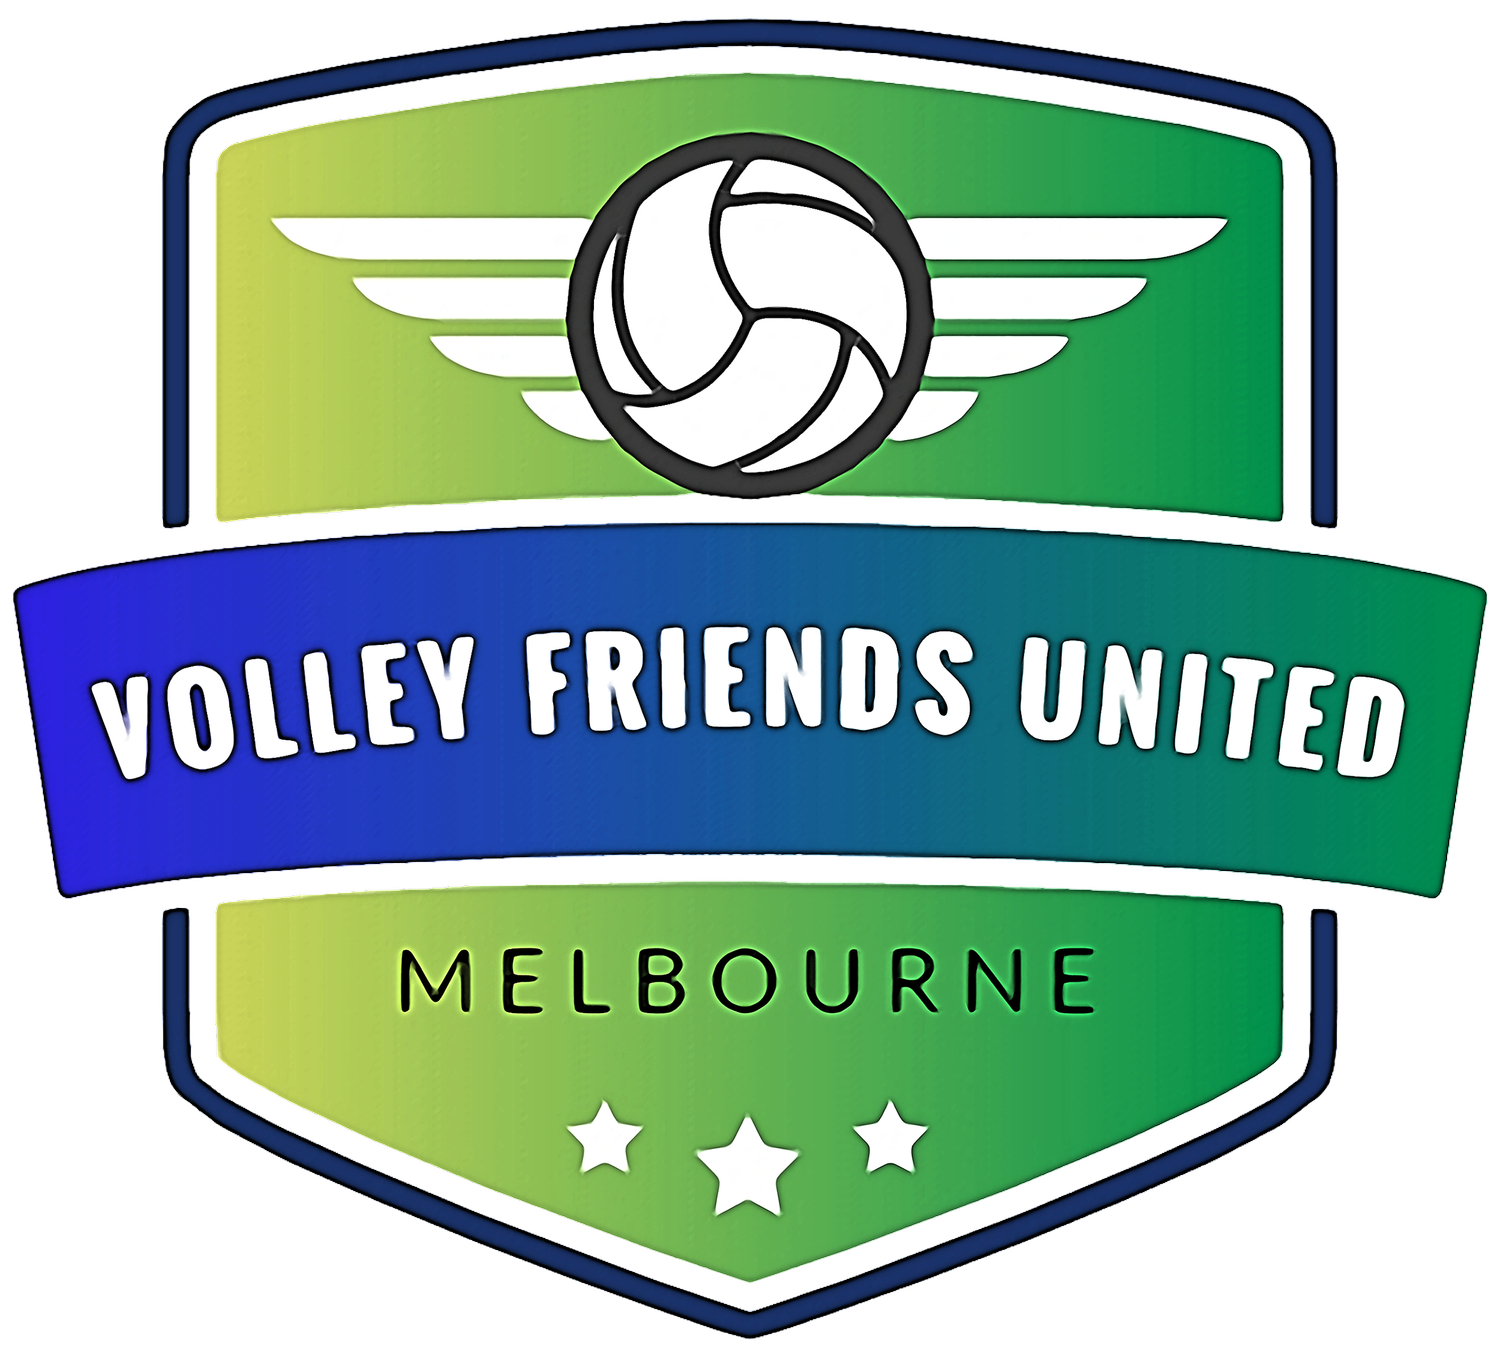 Volley Friends United Melbourne